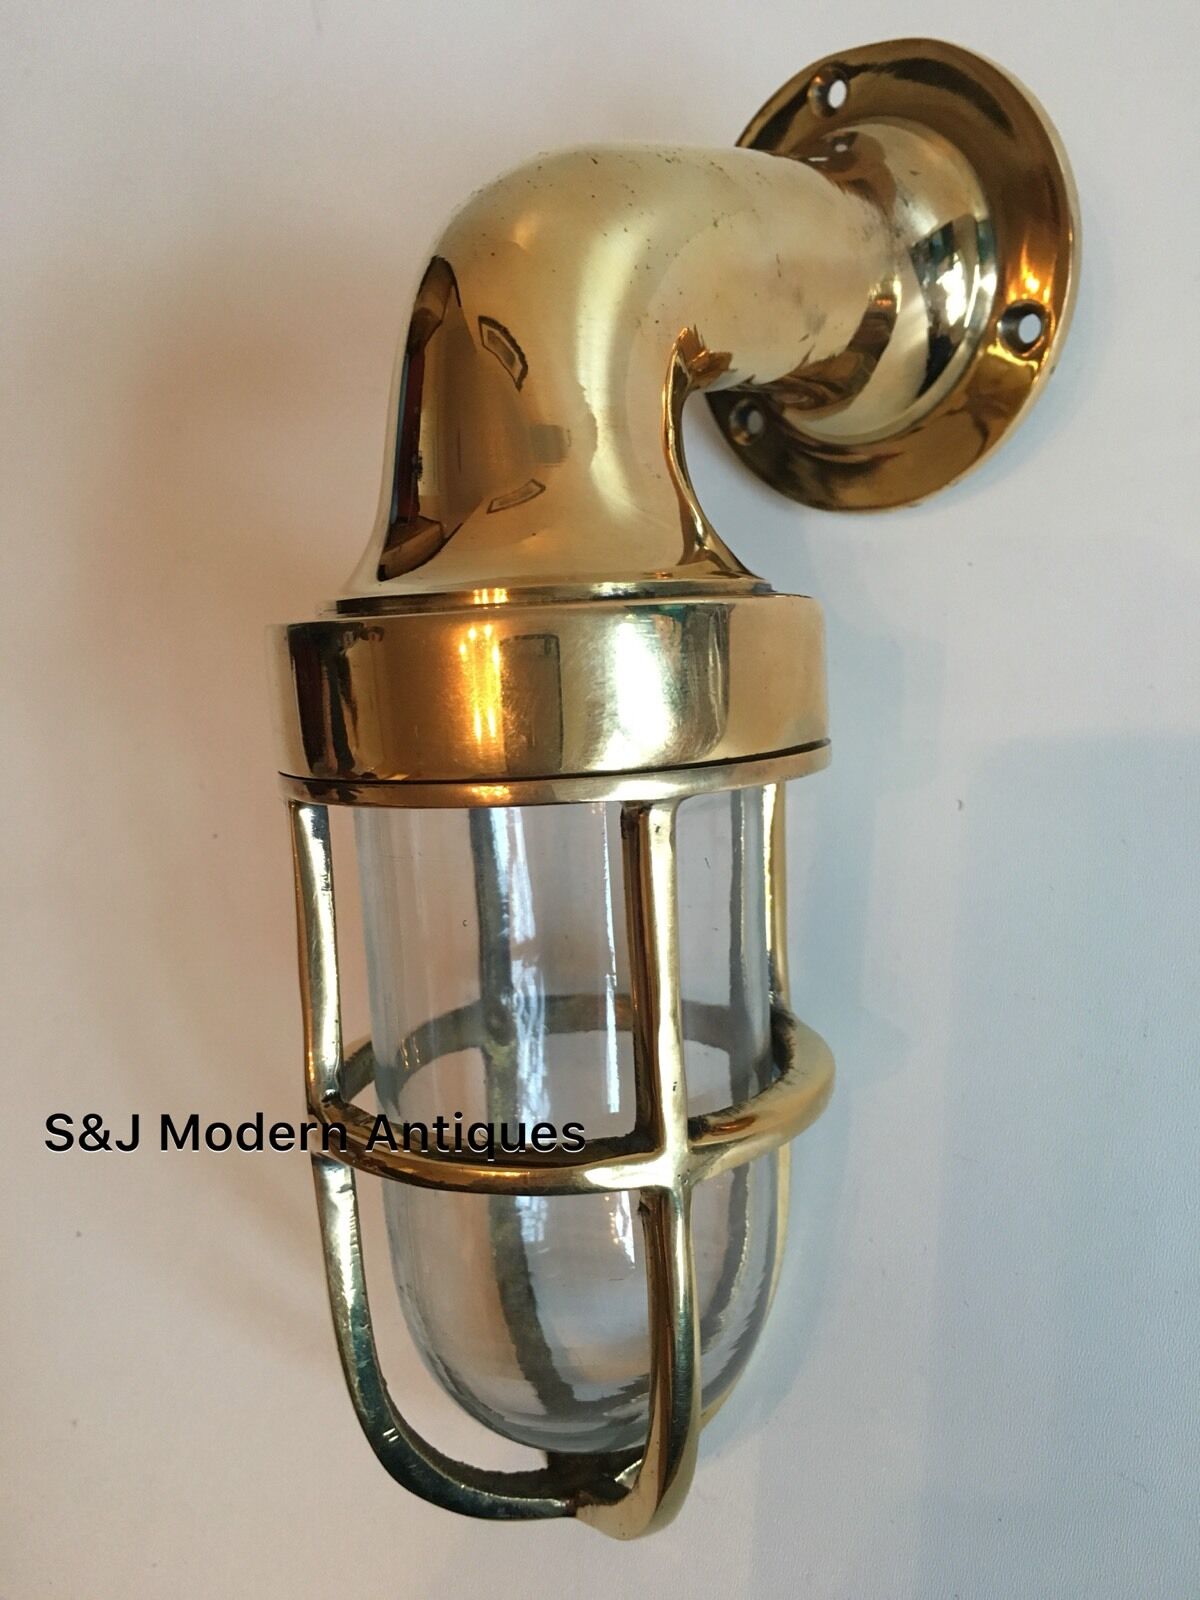 Vintage Industrial Wall Light Antique Retro Cage Bulkhead Gold Brass Ship Lamp